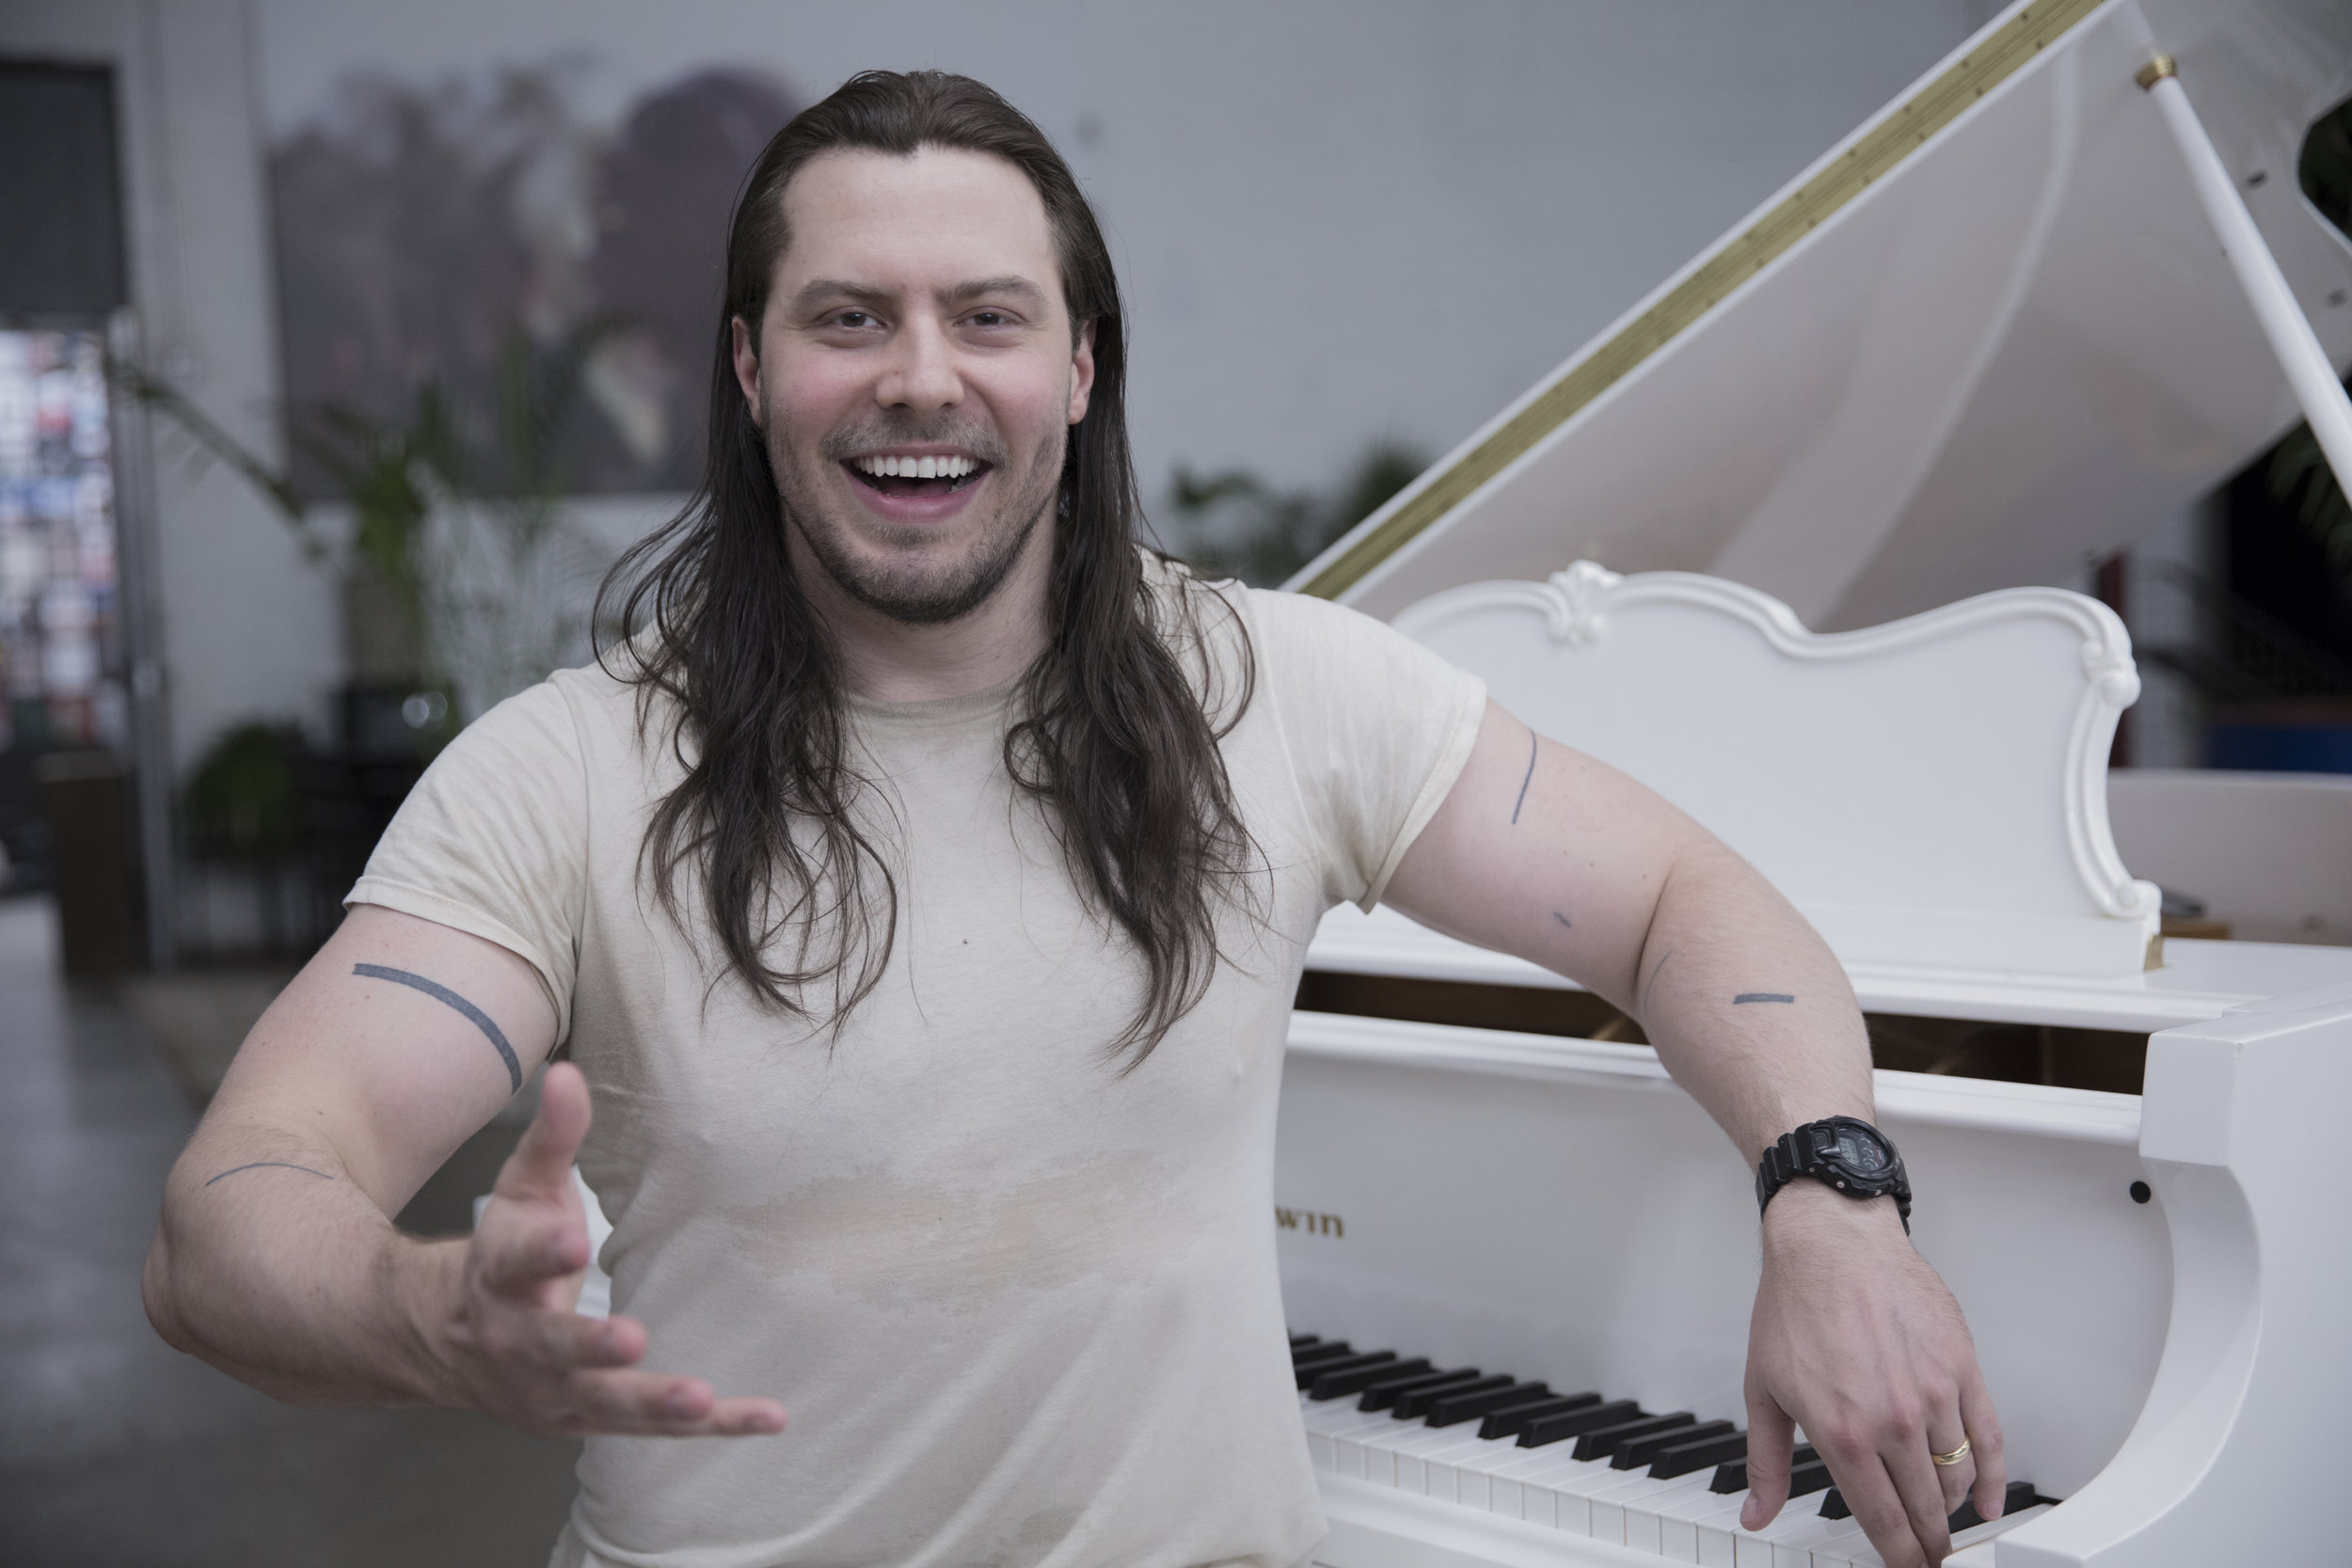  Andrew WK welcomes you to The Orange Episode of  Noisey &amp; Friends , a music variety show created for VICE's music channel Noisey.&nbsp;   click to watch...  